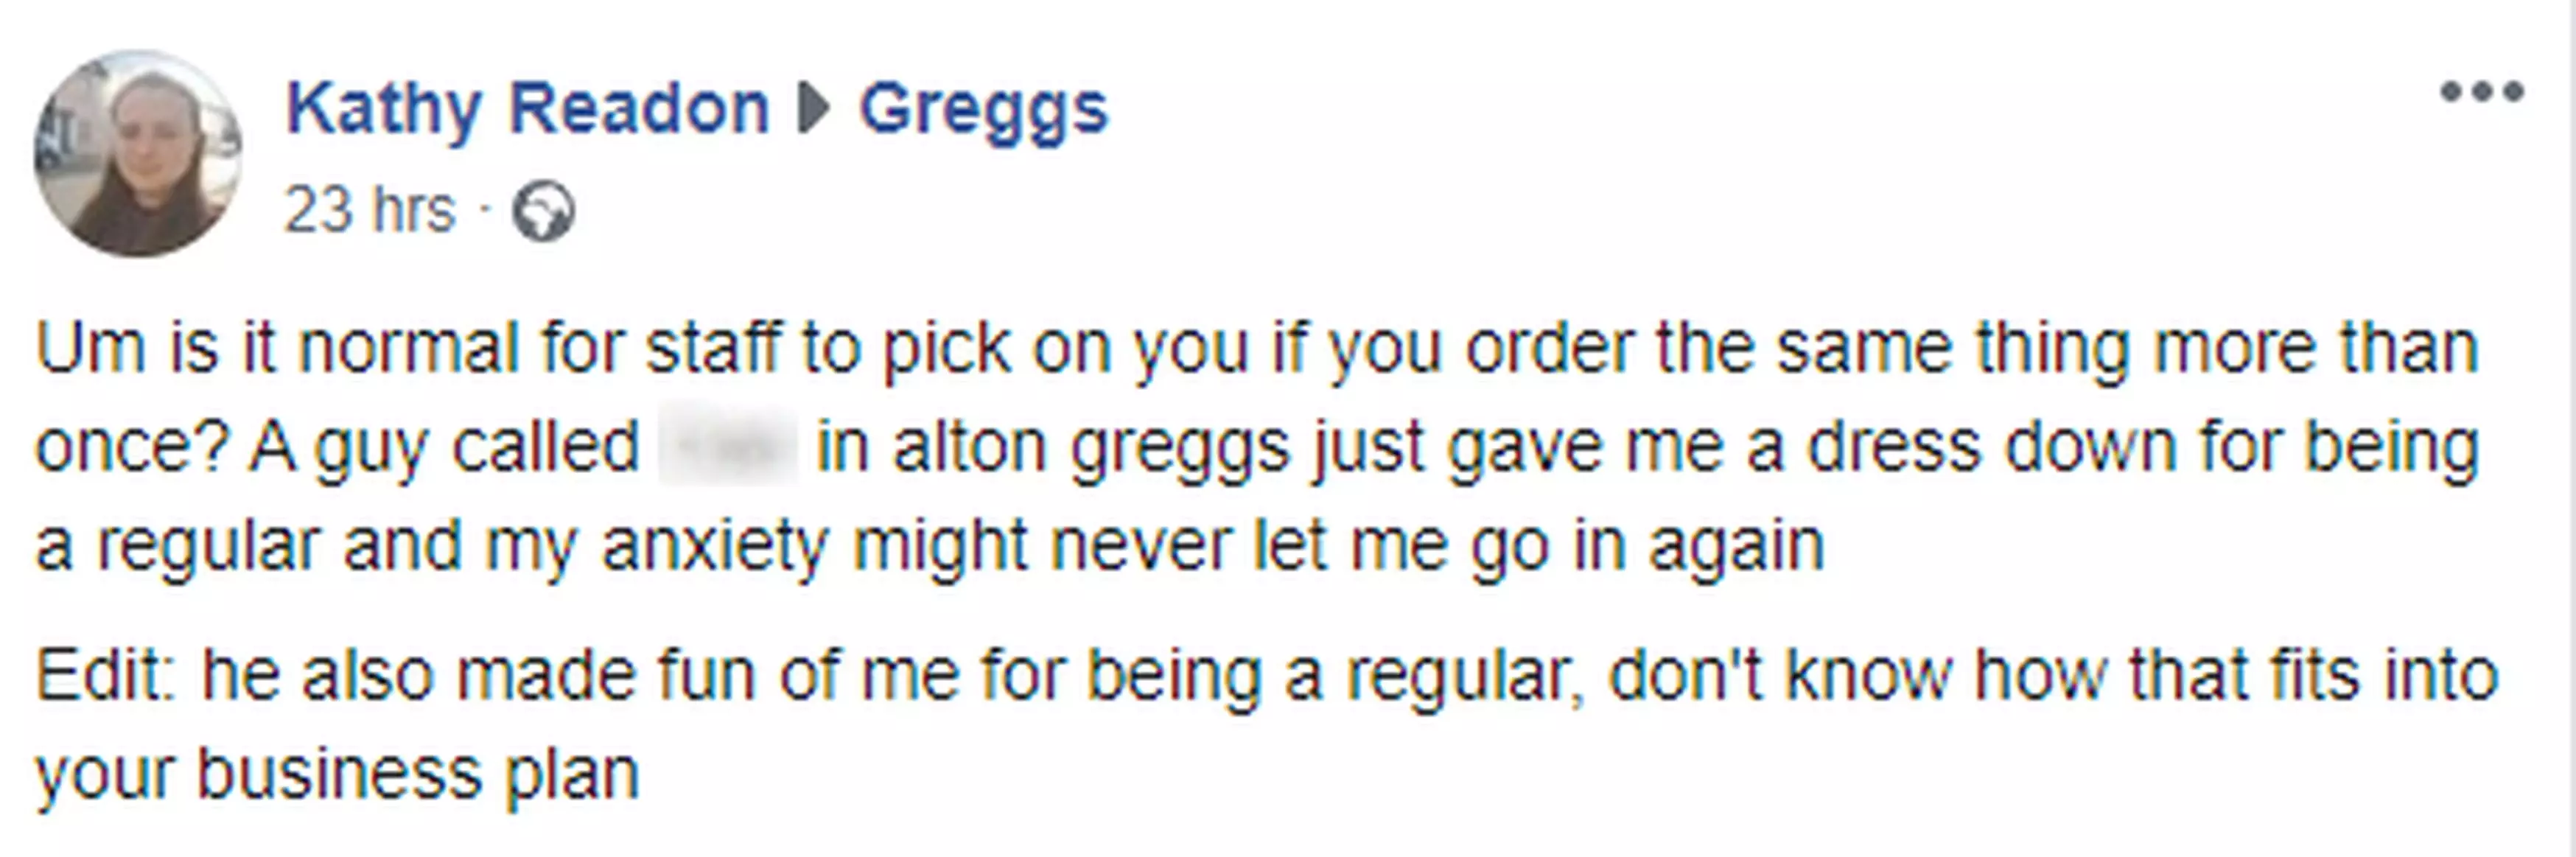 Kathy called out Greggs in her Facebook post (